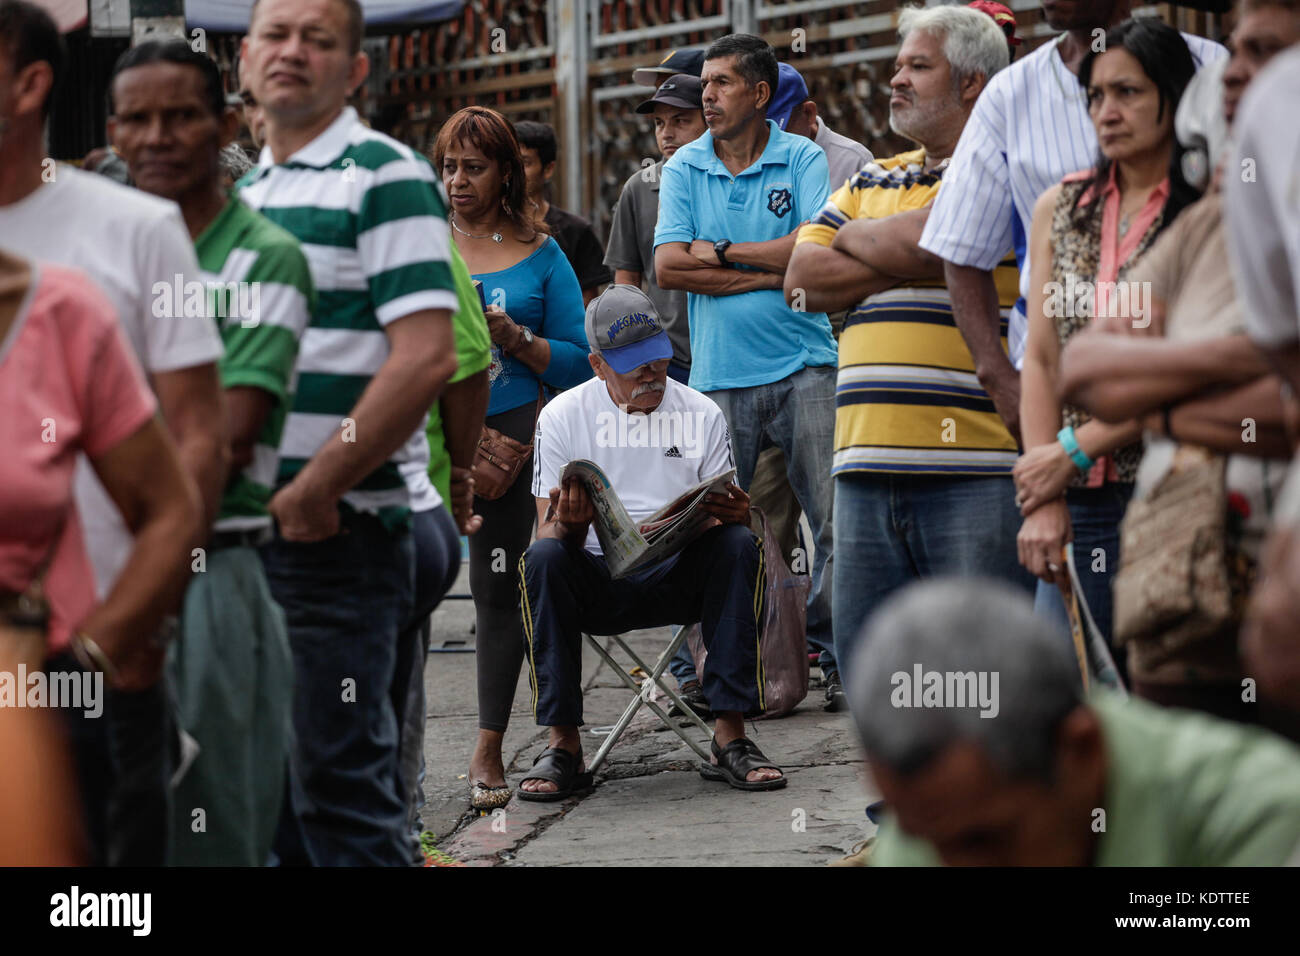 Miranda, Venezuela. 15th Oct, 2017. People wait for their turn to vote at a polling station in Miranda state, Venezuela, on Oct. 15, 2017. On Sunday, over 18 million Venezuelans are eligible to vote for 197 candidates running for the country's 23 governor posts. Credit: Boris Vergara/Xinhua/Alamy Live News Stock Photo